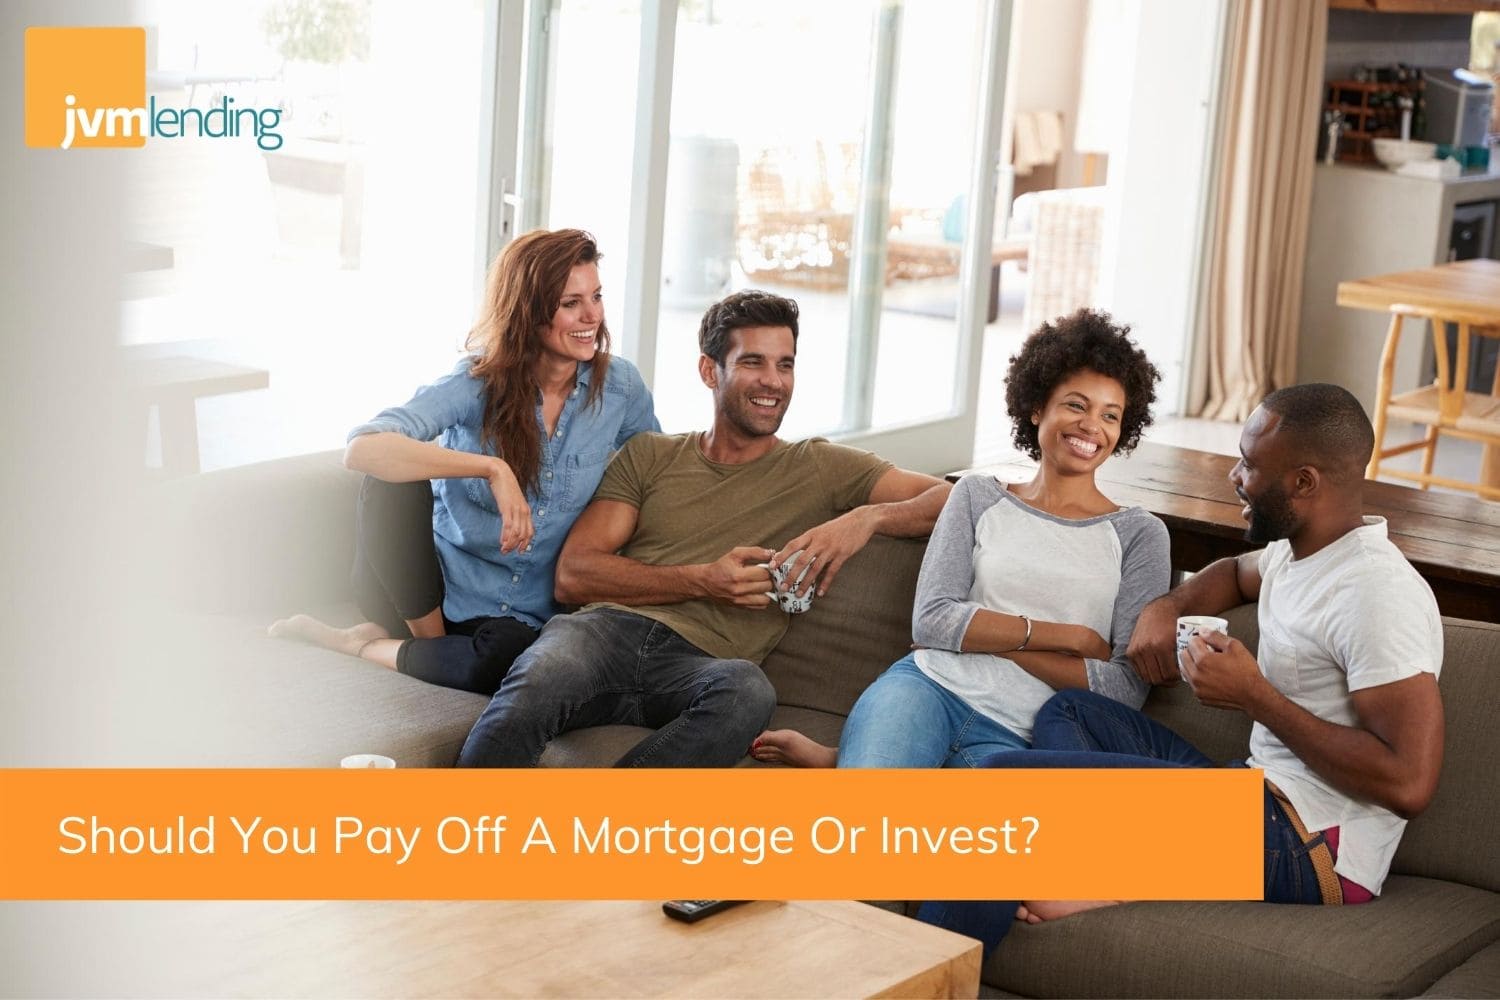 A group of four friends sitting in a living room discussing whether you should pay off a mortgage or invest